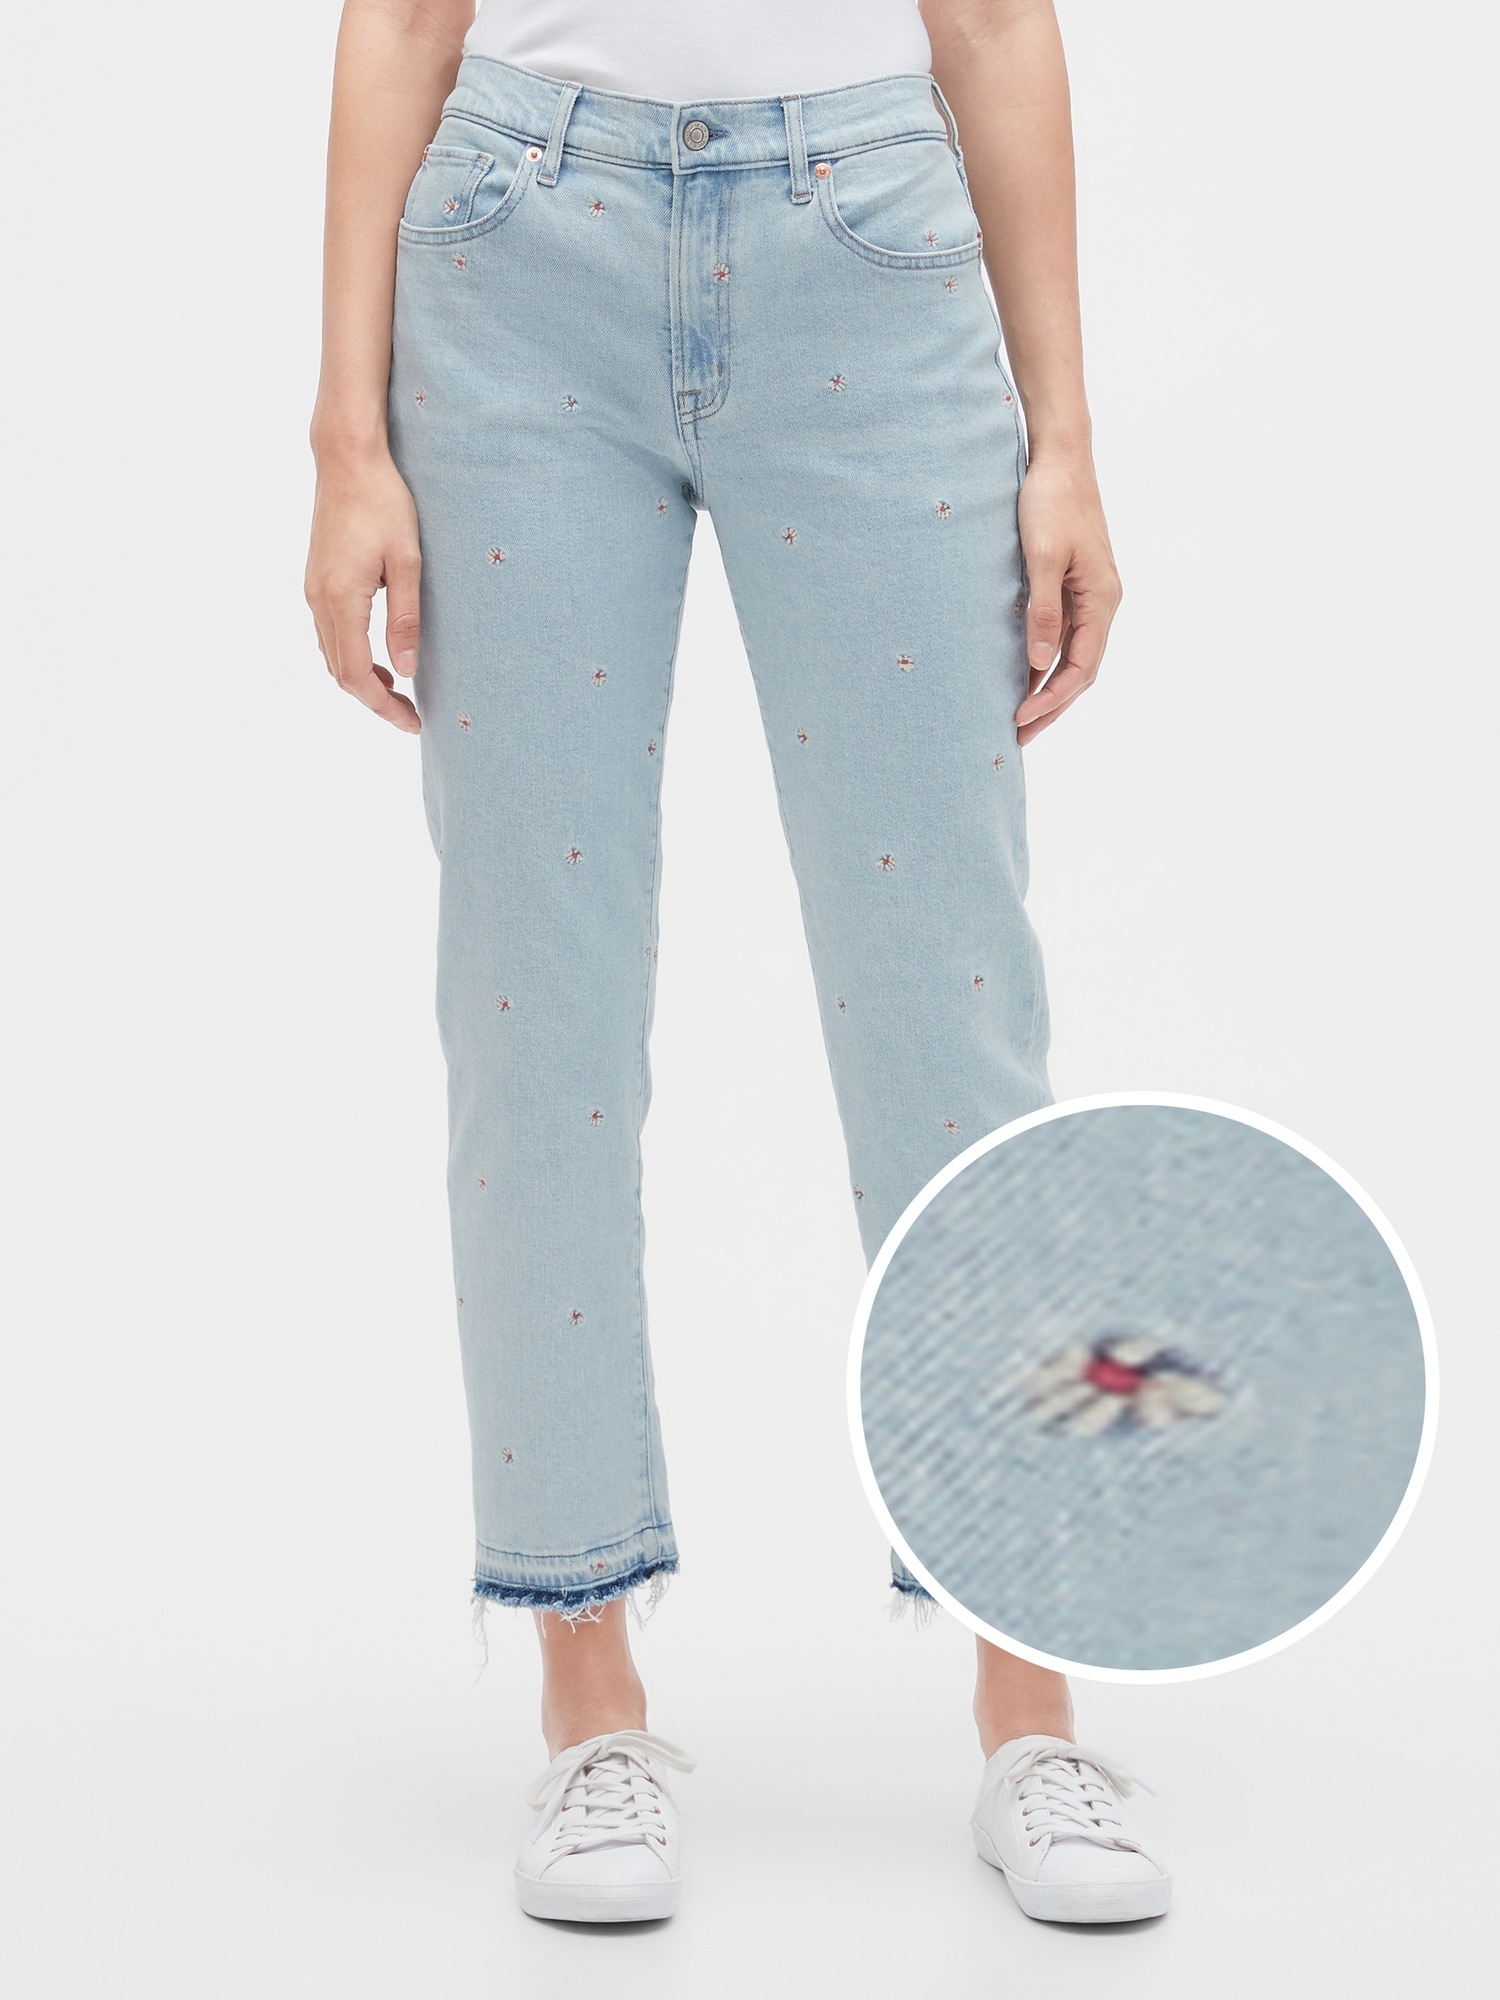 Embroidered Girlfriend Jeans | Gap Factory